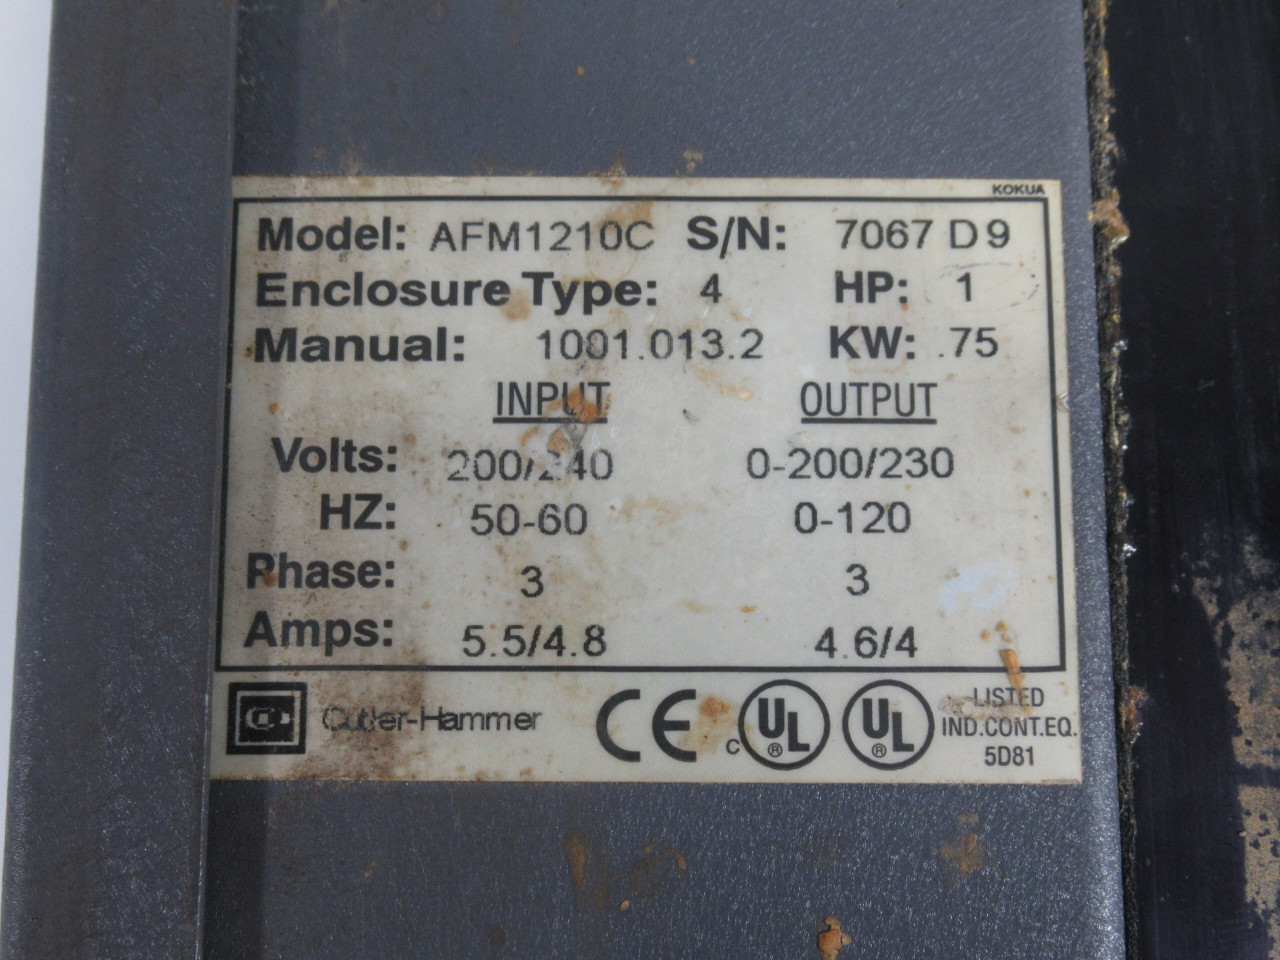 Cutler Hammer AFM1210C Frequency Drive 1HP 3ph 0-200/230V 4.6/4A 0-120Hz USED